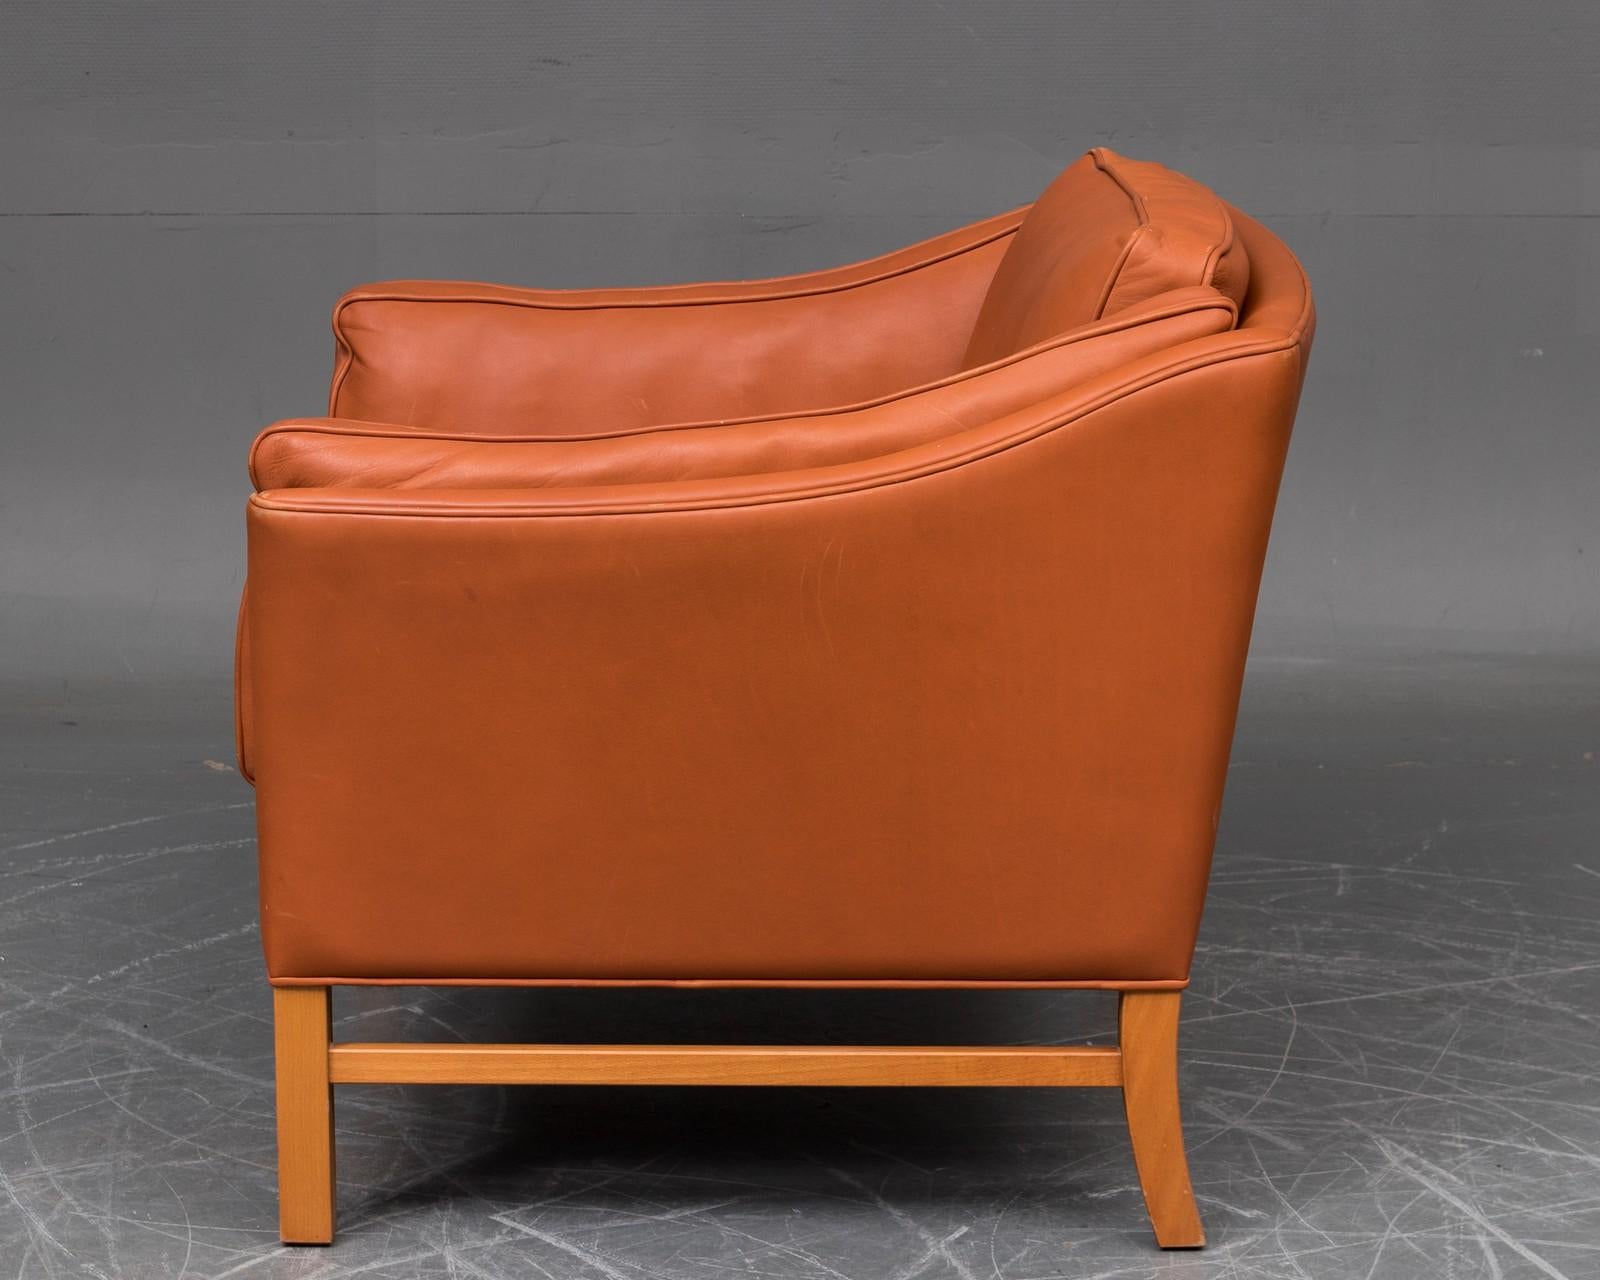 Very comfortable armchair by Grant Møbelfabrik, Denmark. Lounge chair covered with cognac-colored leather. Beech wood frame. Measures: H 78 cm, SH 46 cm. Traces of wear, some marks on leather.